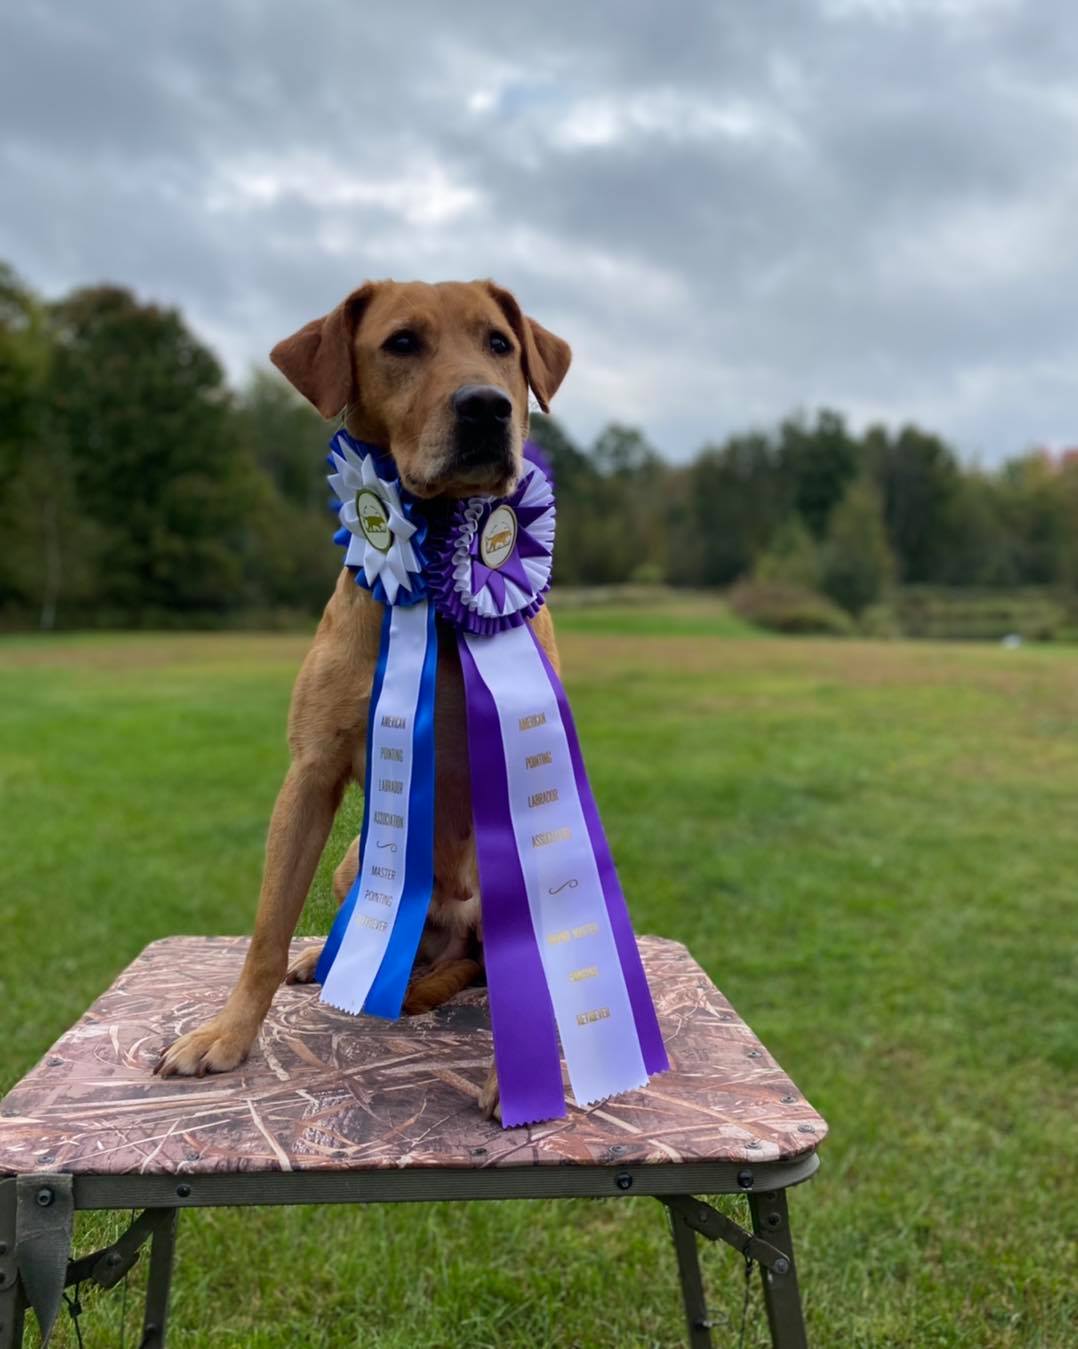 A lab sitting on a stand with blue and purple ribbons